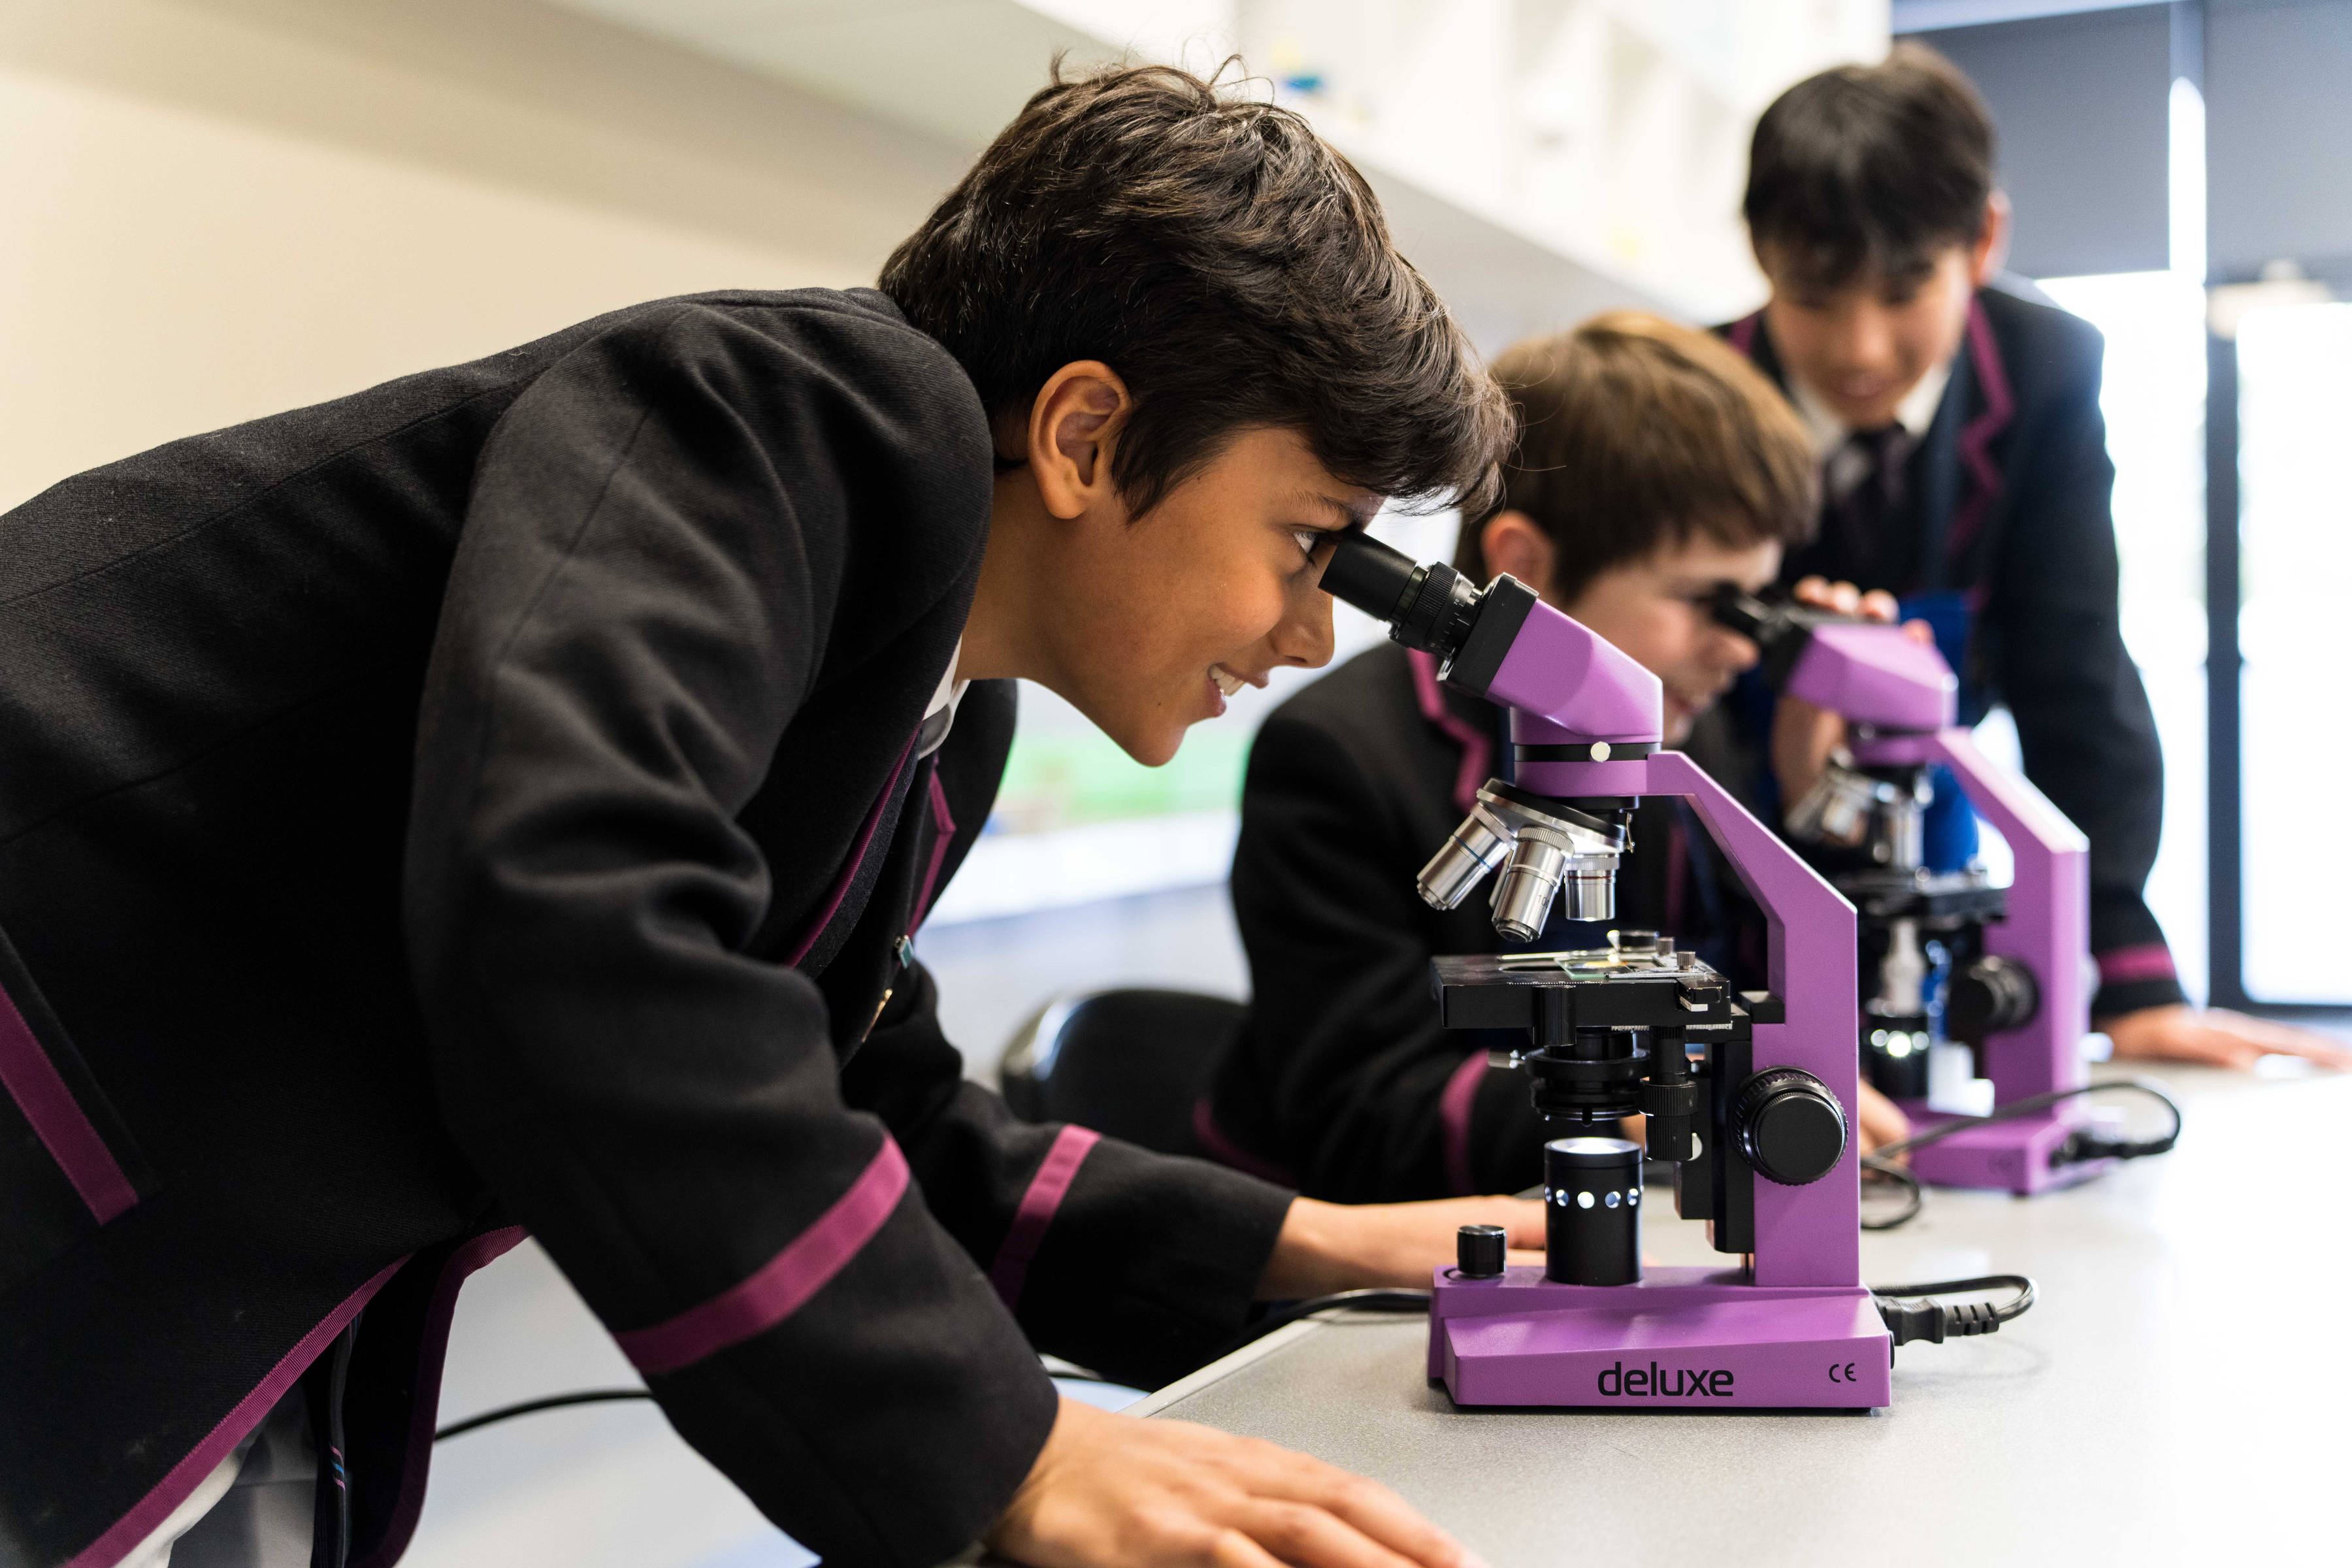 Three Hutchins students in a science class; two are looking through microscopes.